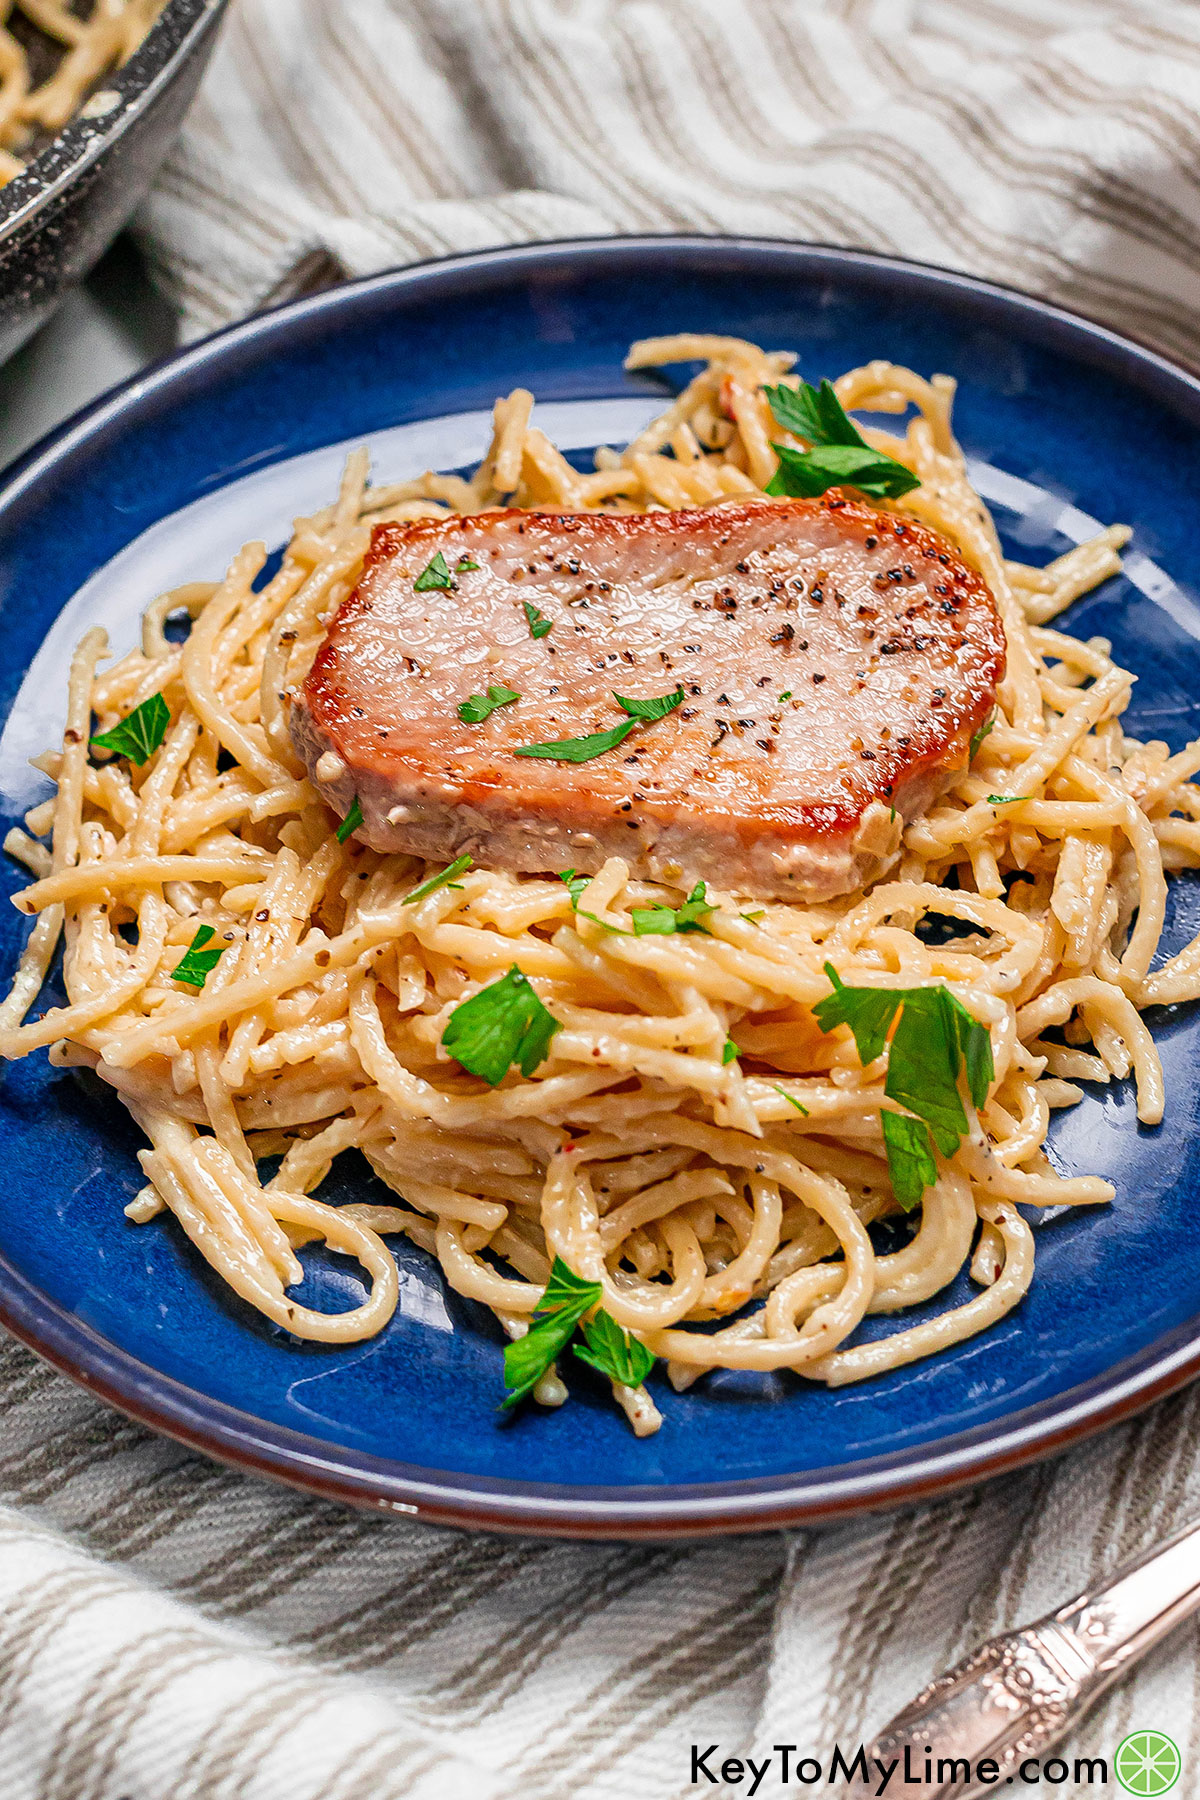 A pile of creamy pasta topped with a juicy tender pork chop slice.